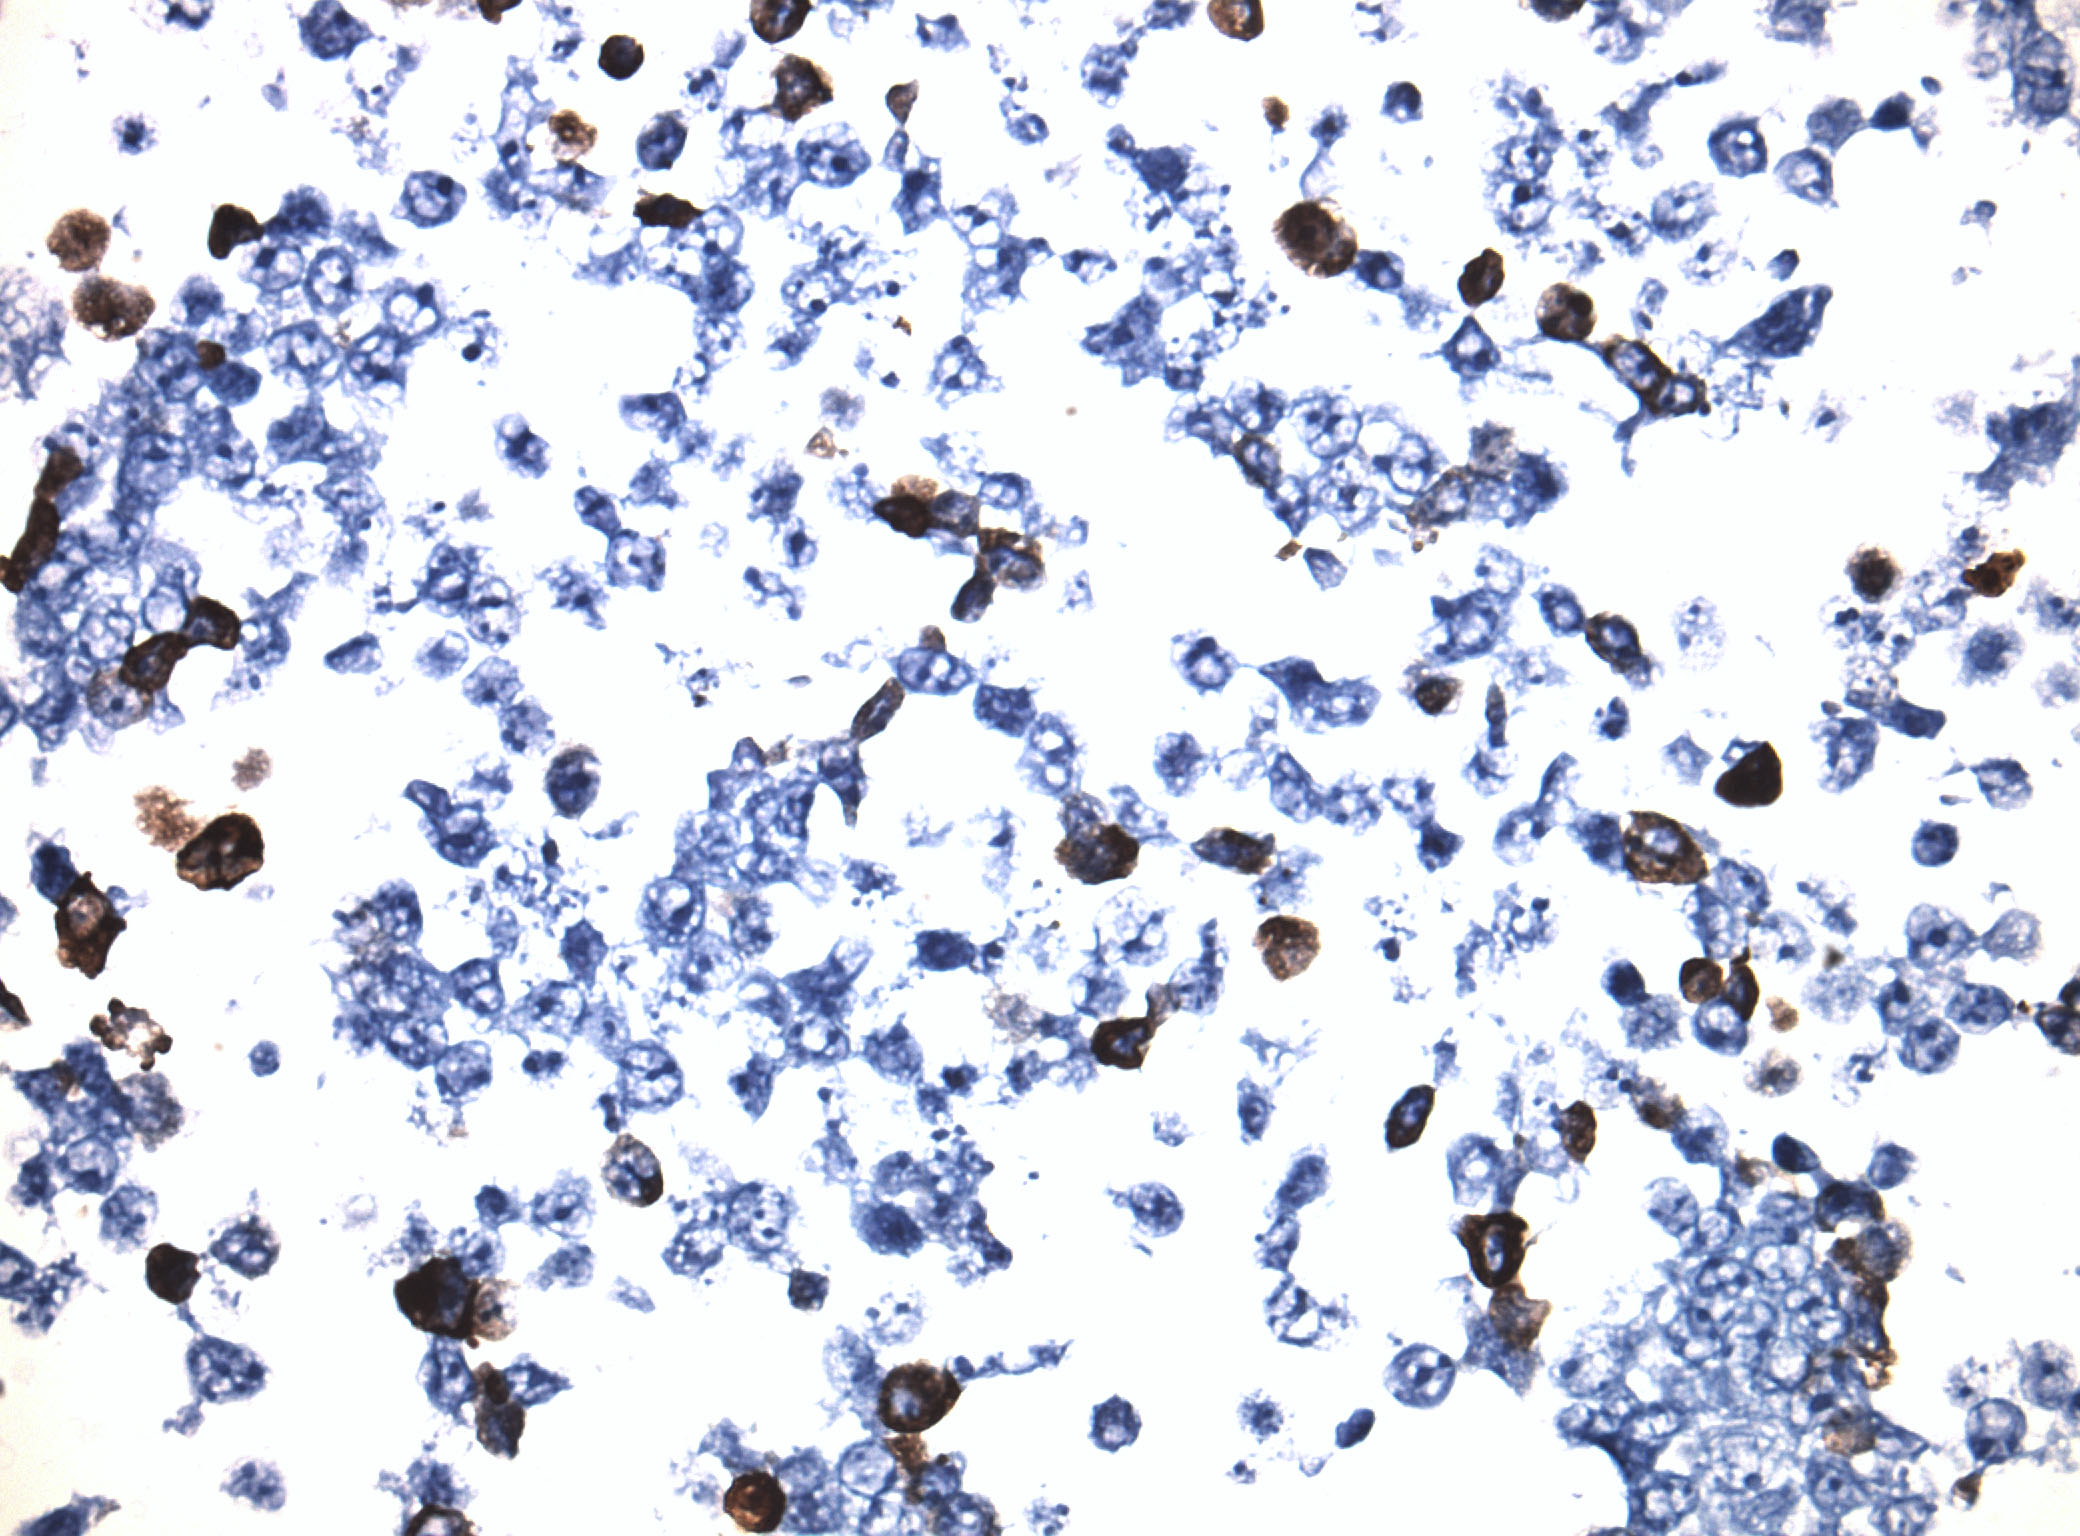 Immunohistology staining on MAST205 overexpressed cytosection TS409492P5 with mouse anti DDK clone OTI11C3 C/N TA180144 at 1:400 dilution 4C O/N. Antibody staining was achieved with HIER Citrate pH6 , Polink1 with DAB chromogen detection kit (D11-18). Positive stain shown with the brown chromogen present. HEK293T cells were transfected with cDNA clone RC209492, 5 micron sections, 40x magnification